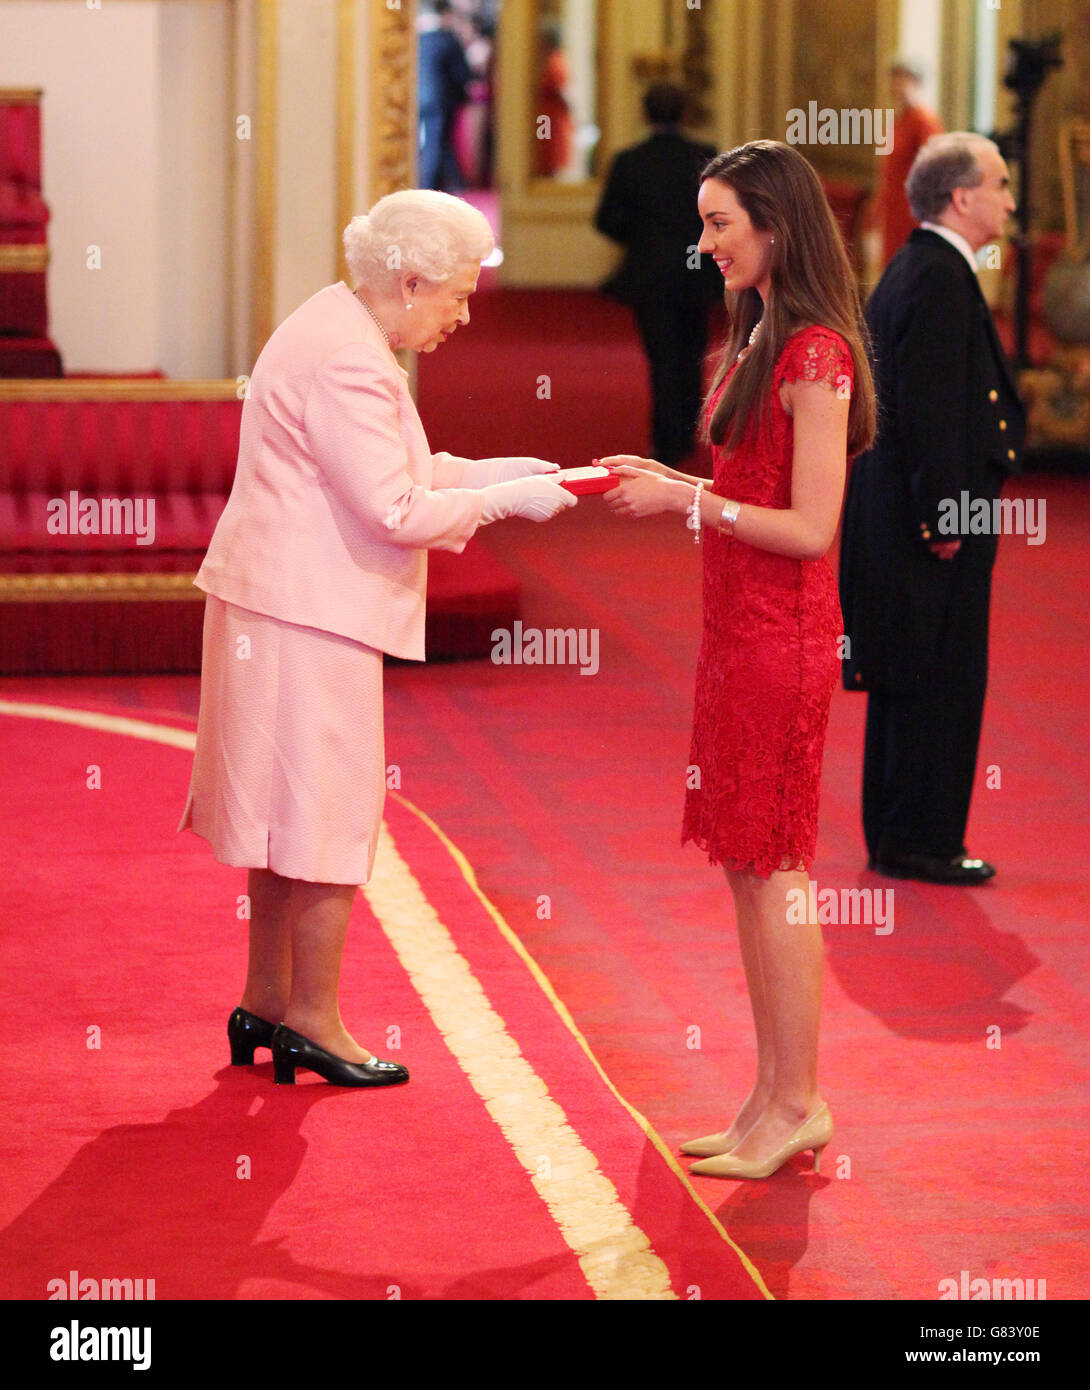 Kate Row from Australia meets Queen Elizabeth II at Buckingham Palace, London during the ceremony for the 2015 winners of The Queen's Young Leaders Awards. Stock Photo